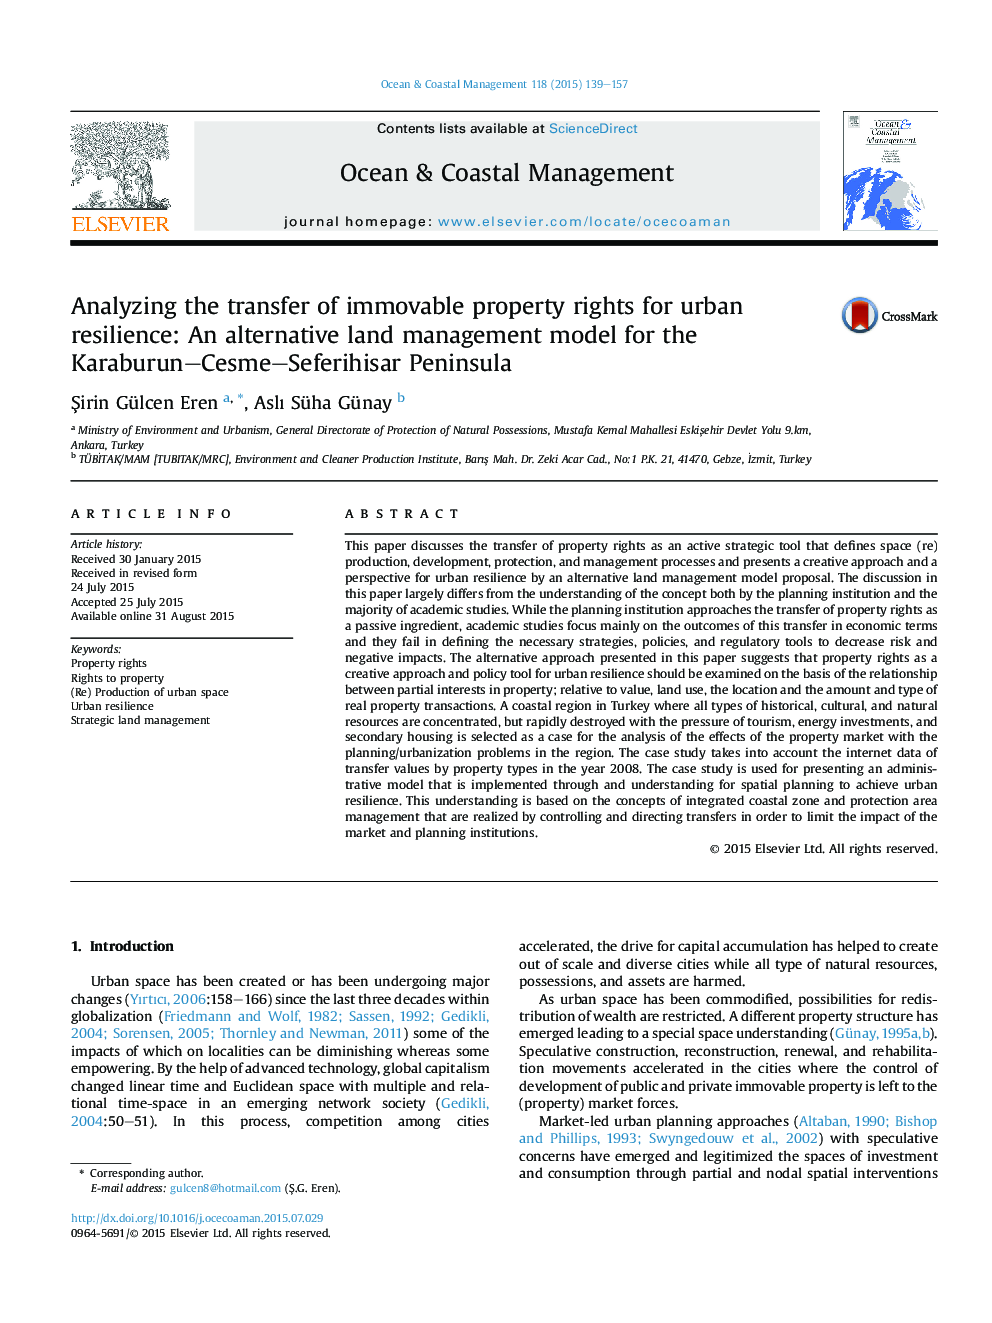 Analyzing the transfer of immovable property rights for urban resilience: An alternative land management model for the Karaburun-Cesme-Seferihisar Peninsula